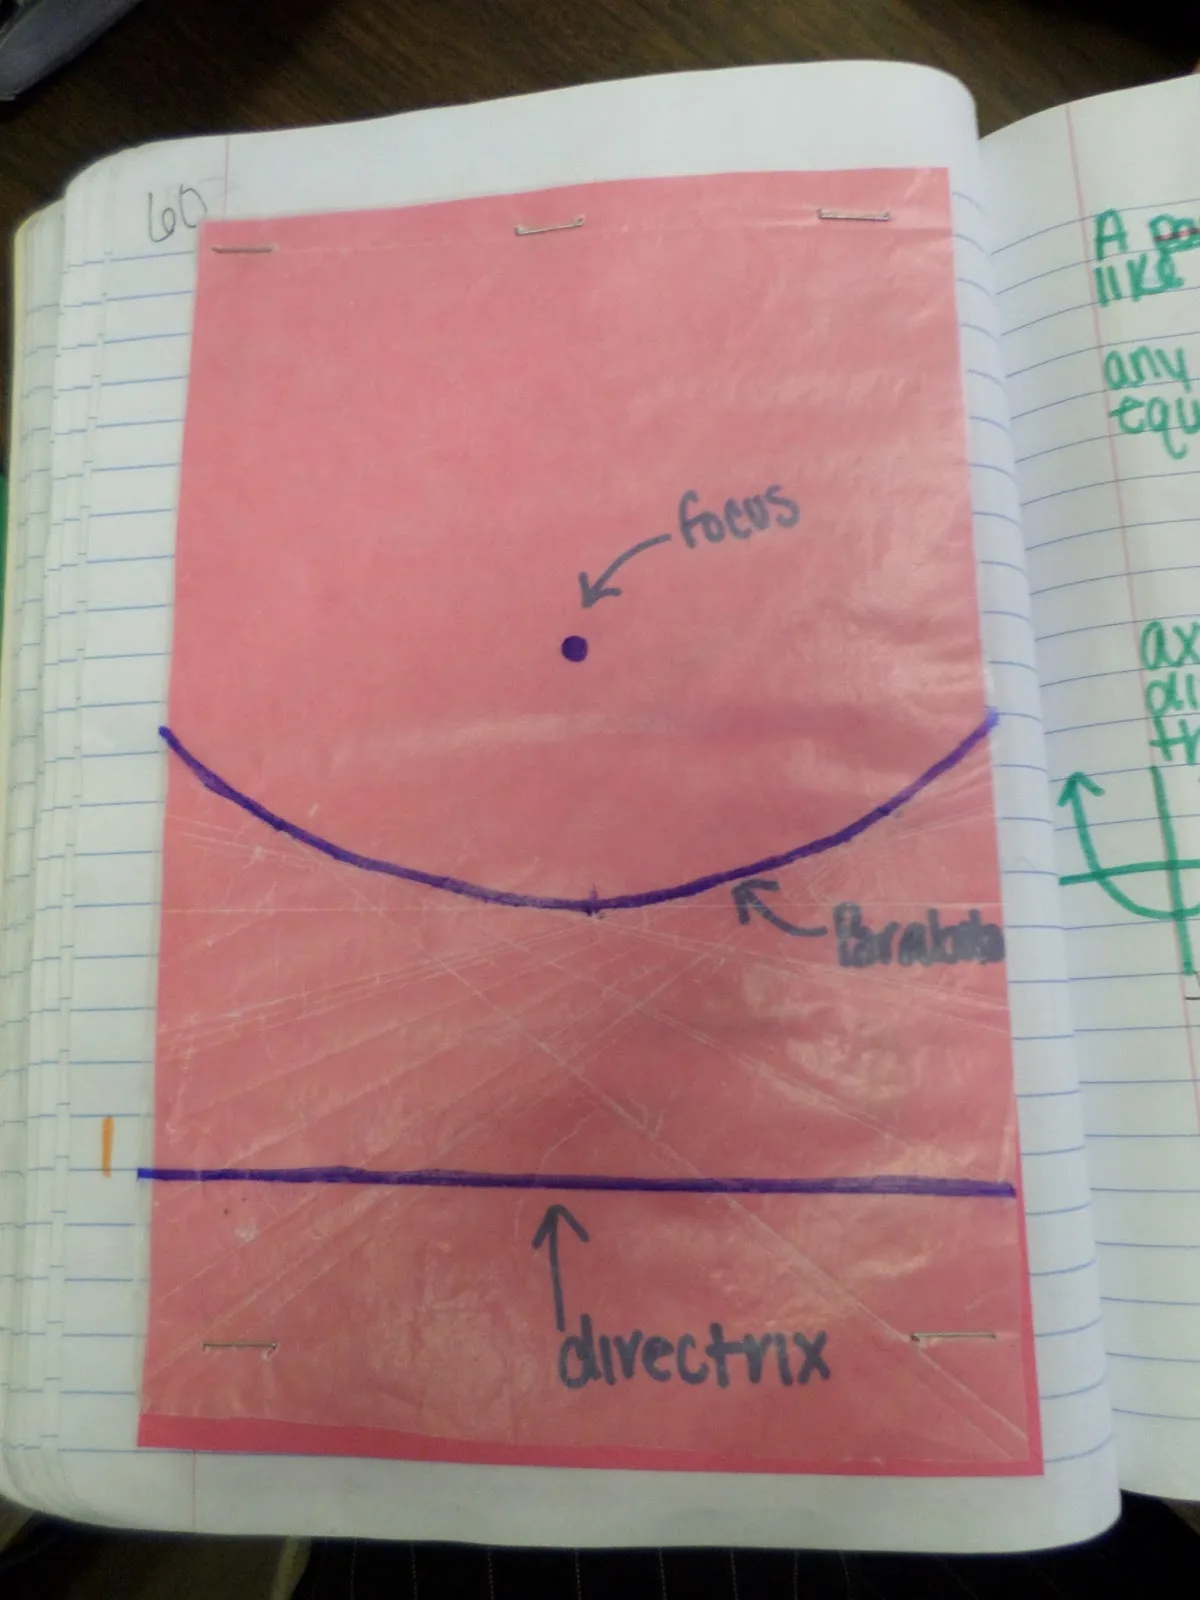 Student Example of Wax Paper Parabola Activity. 